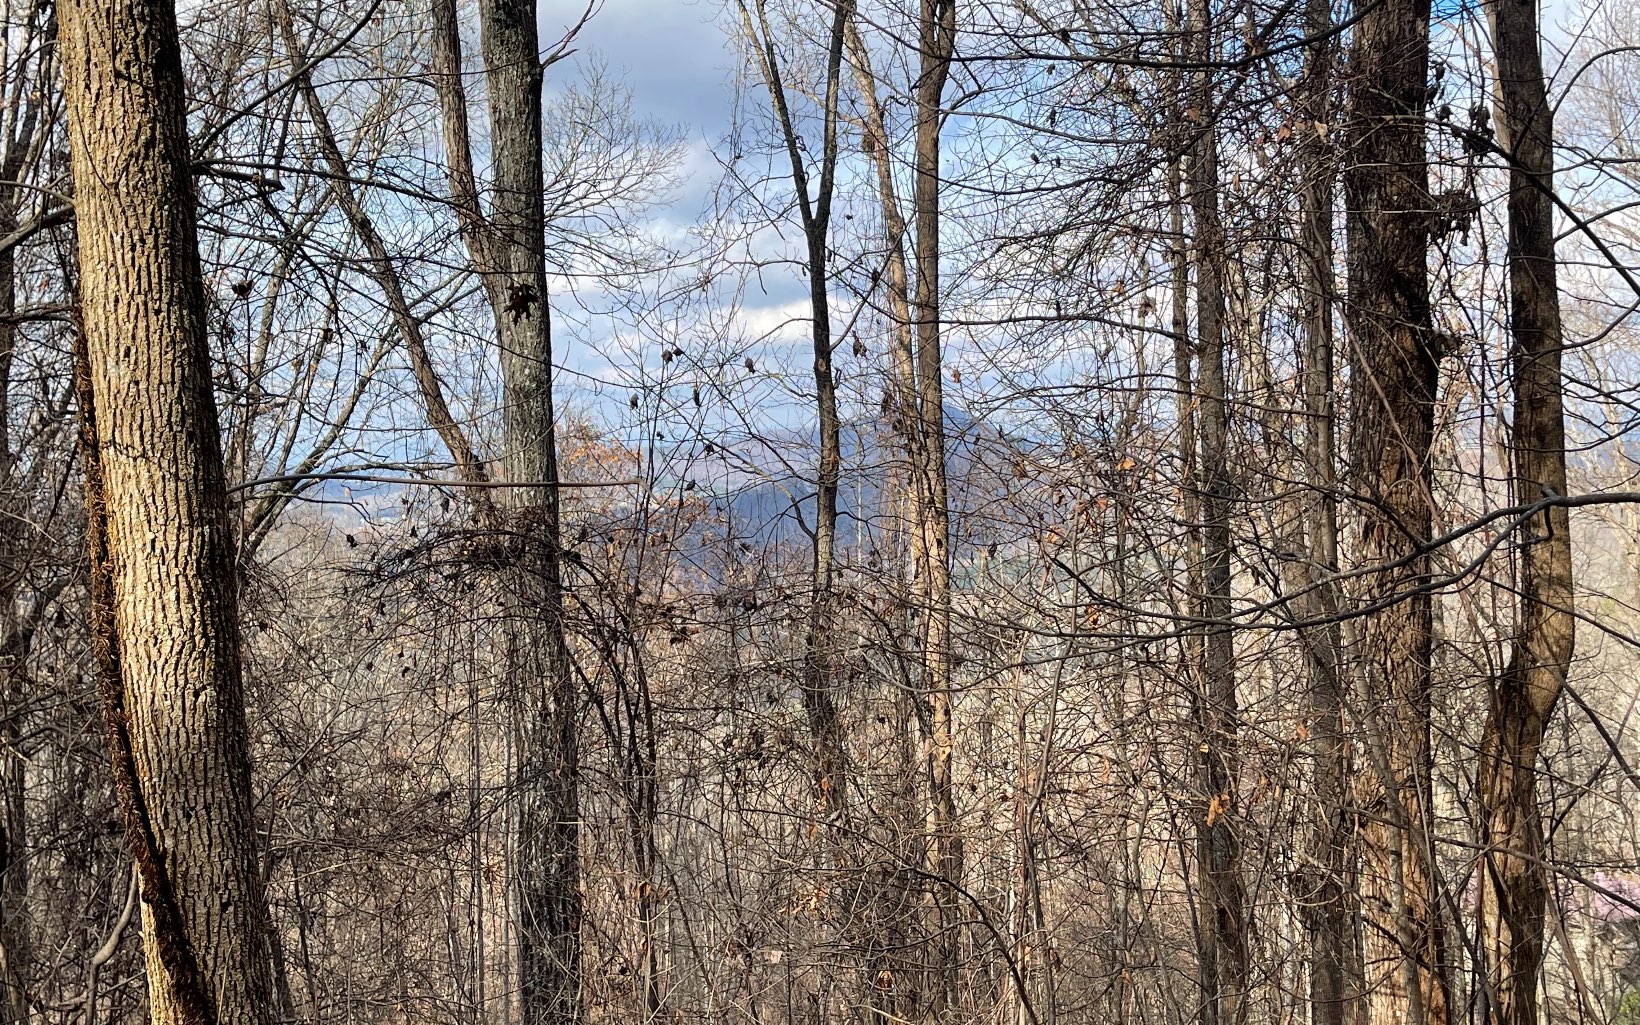 BEAUTIFULLY WOODED 8+ ACRE TRACT IN THE MOUNTAINS OF NORTH GEORGIA! This tract is conveniently located just minutes from town but yet offers the privacy, nice views, paved roads and the perfect place to build your mountain retreat.